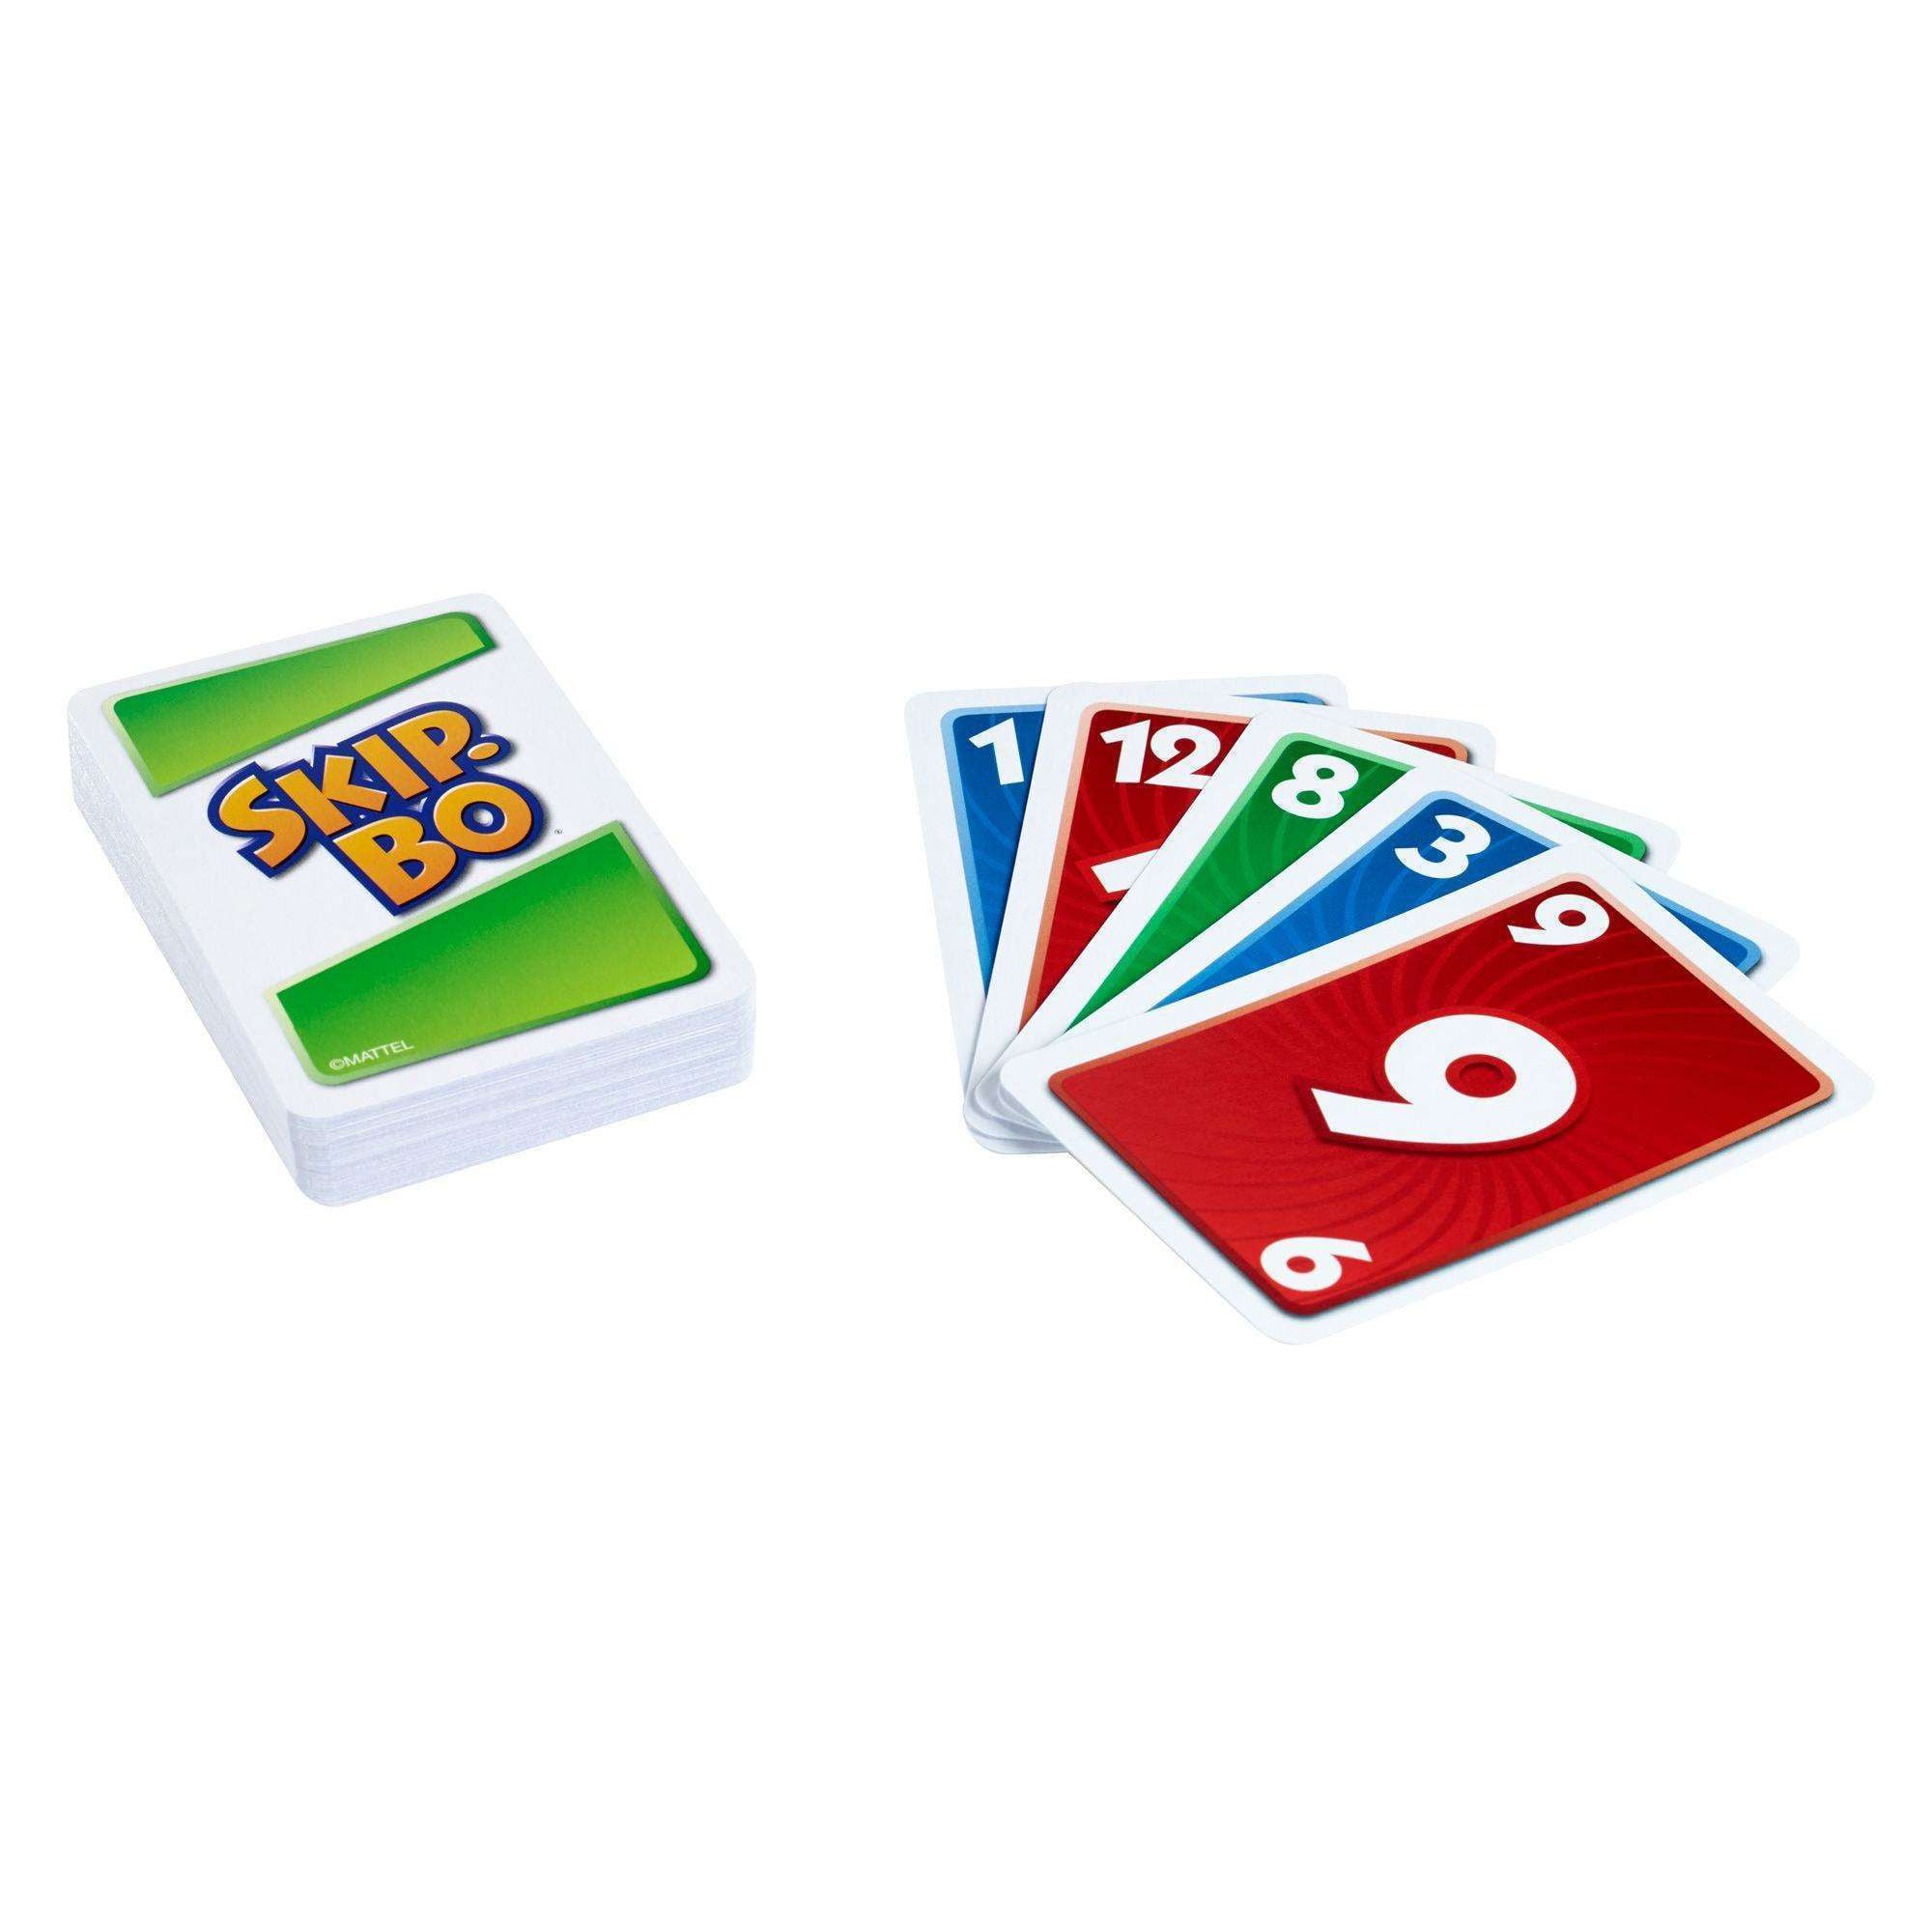 2 to 6 Players New Mattel Family card Game Skip-Bo Card Game 